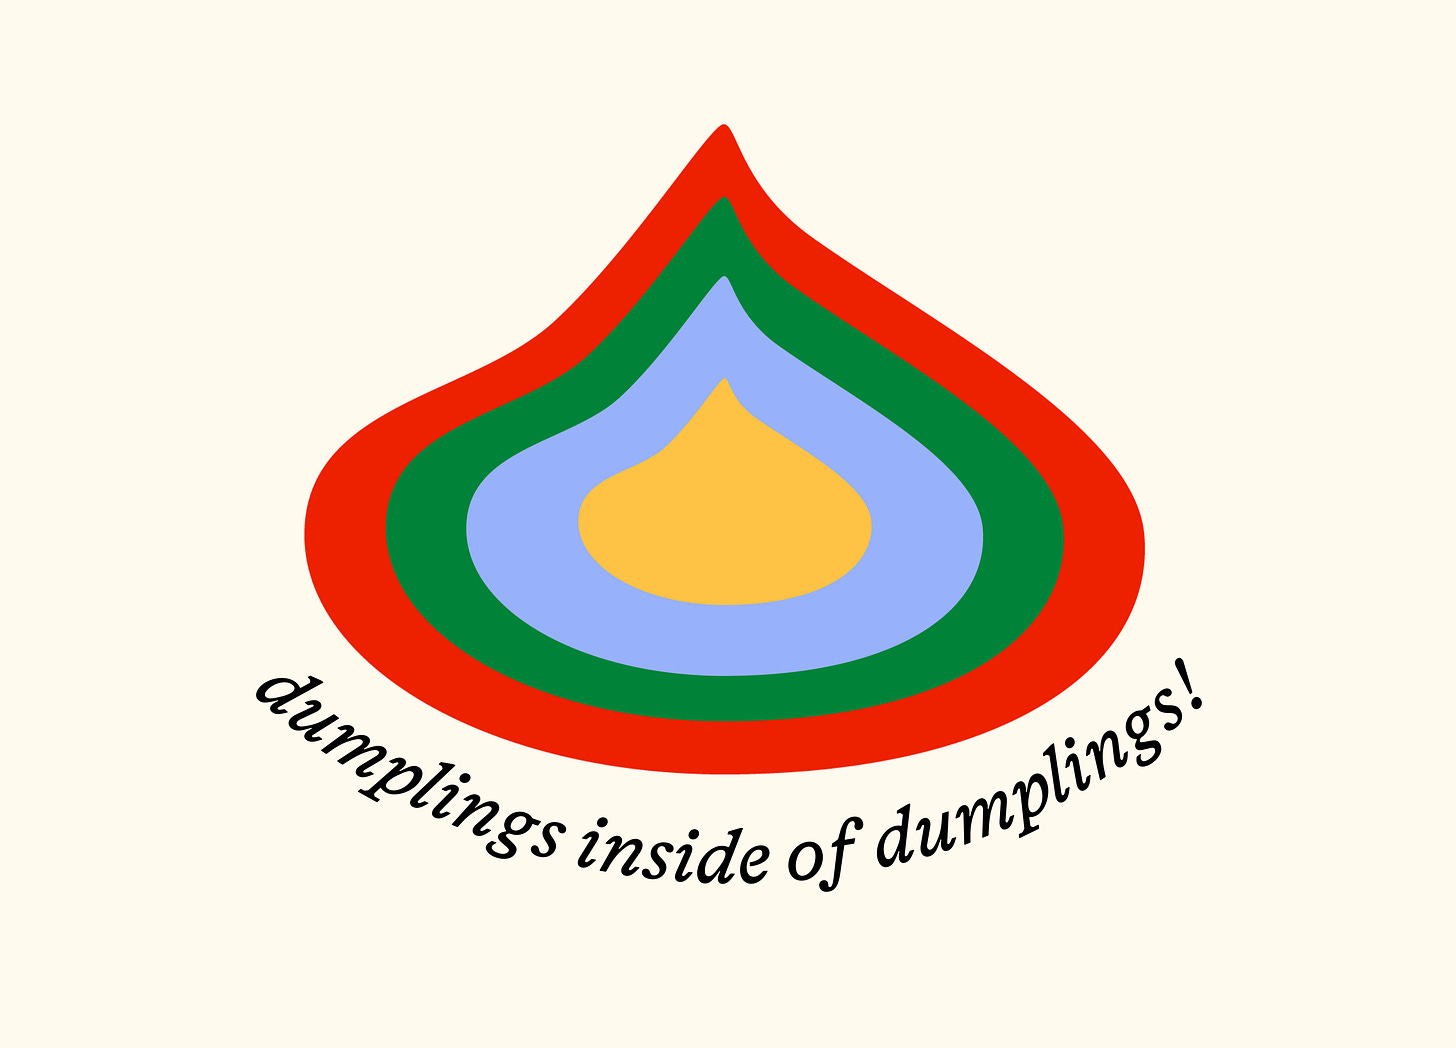 icon shapes of dumplings layered over top of one another in descending sizes to represent the concept of inception dumplings